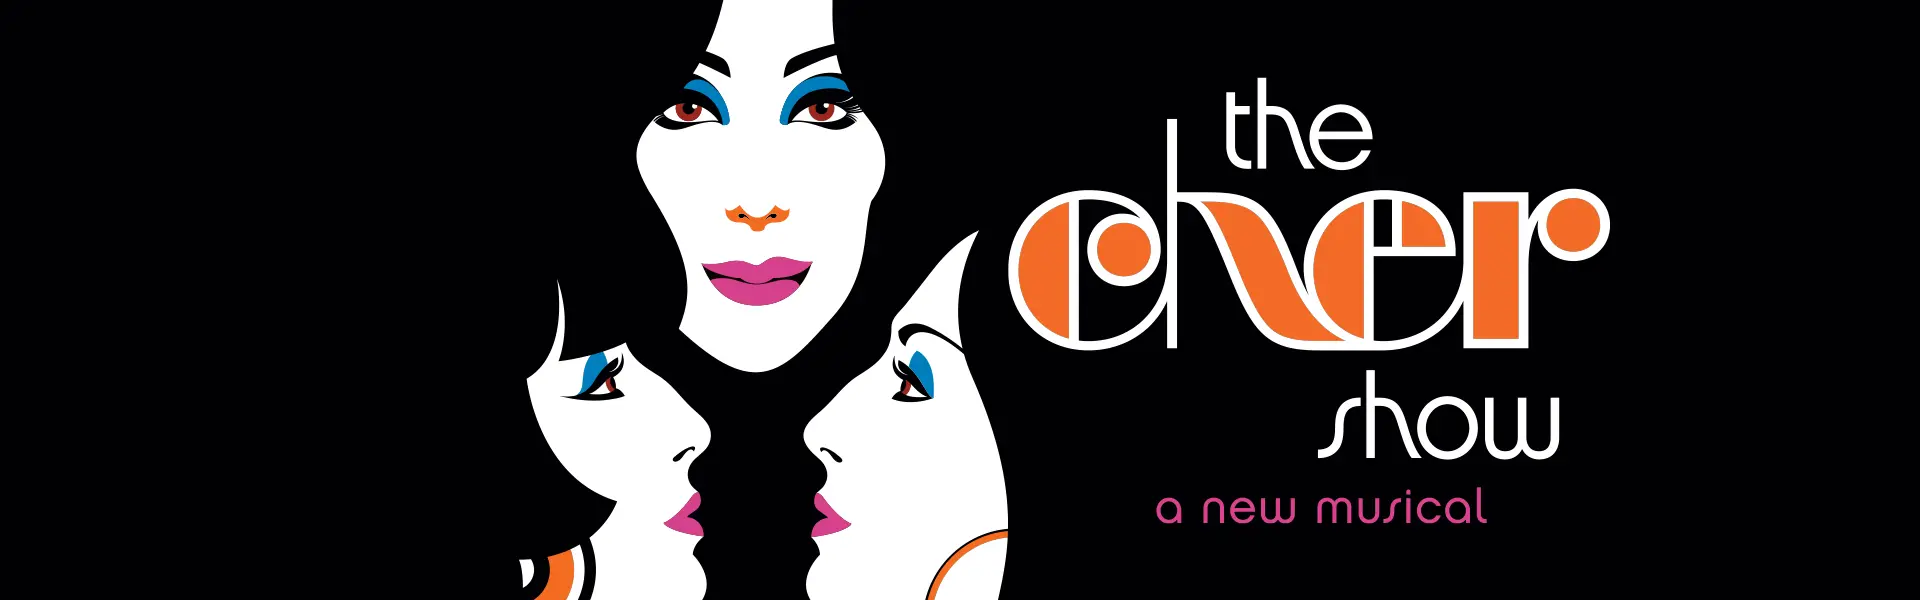 Illustration of Cher. Text: The Cher Show Musical. Thursday April 4, 7:00pm